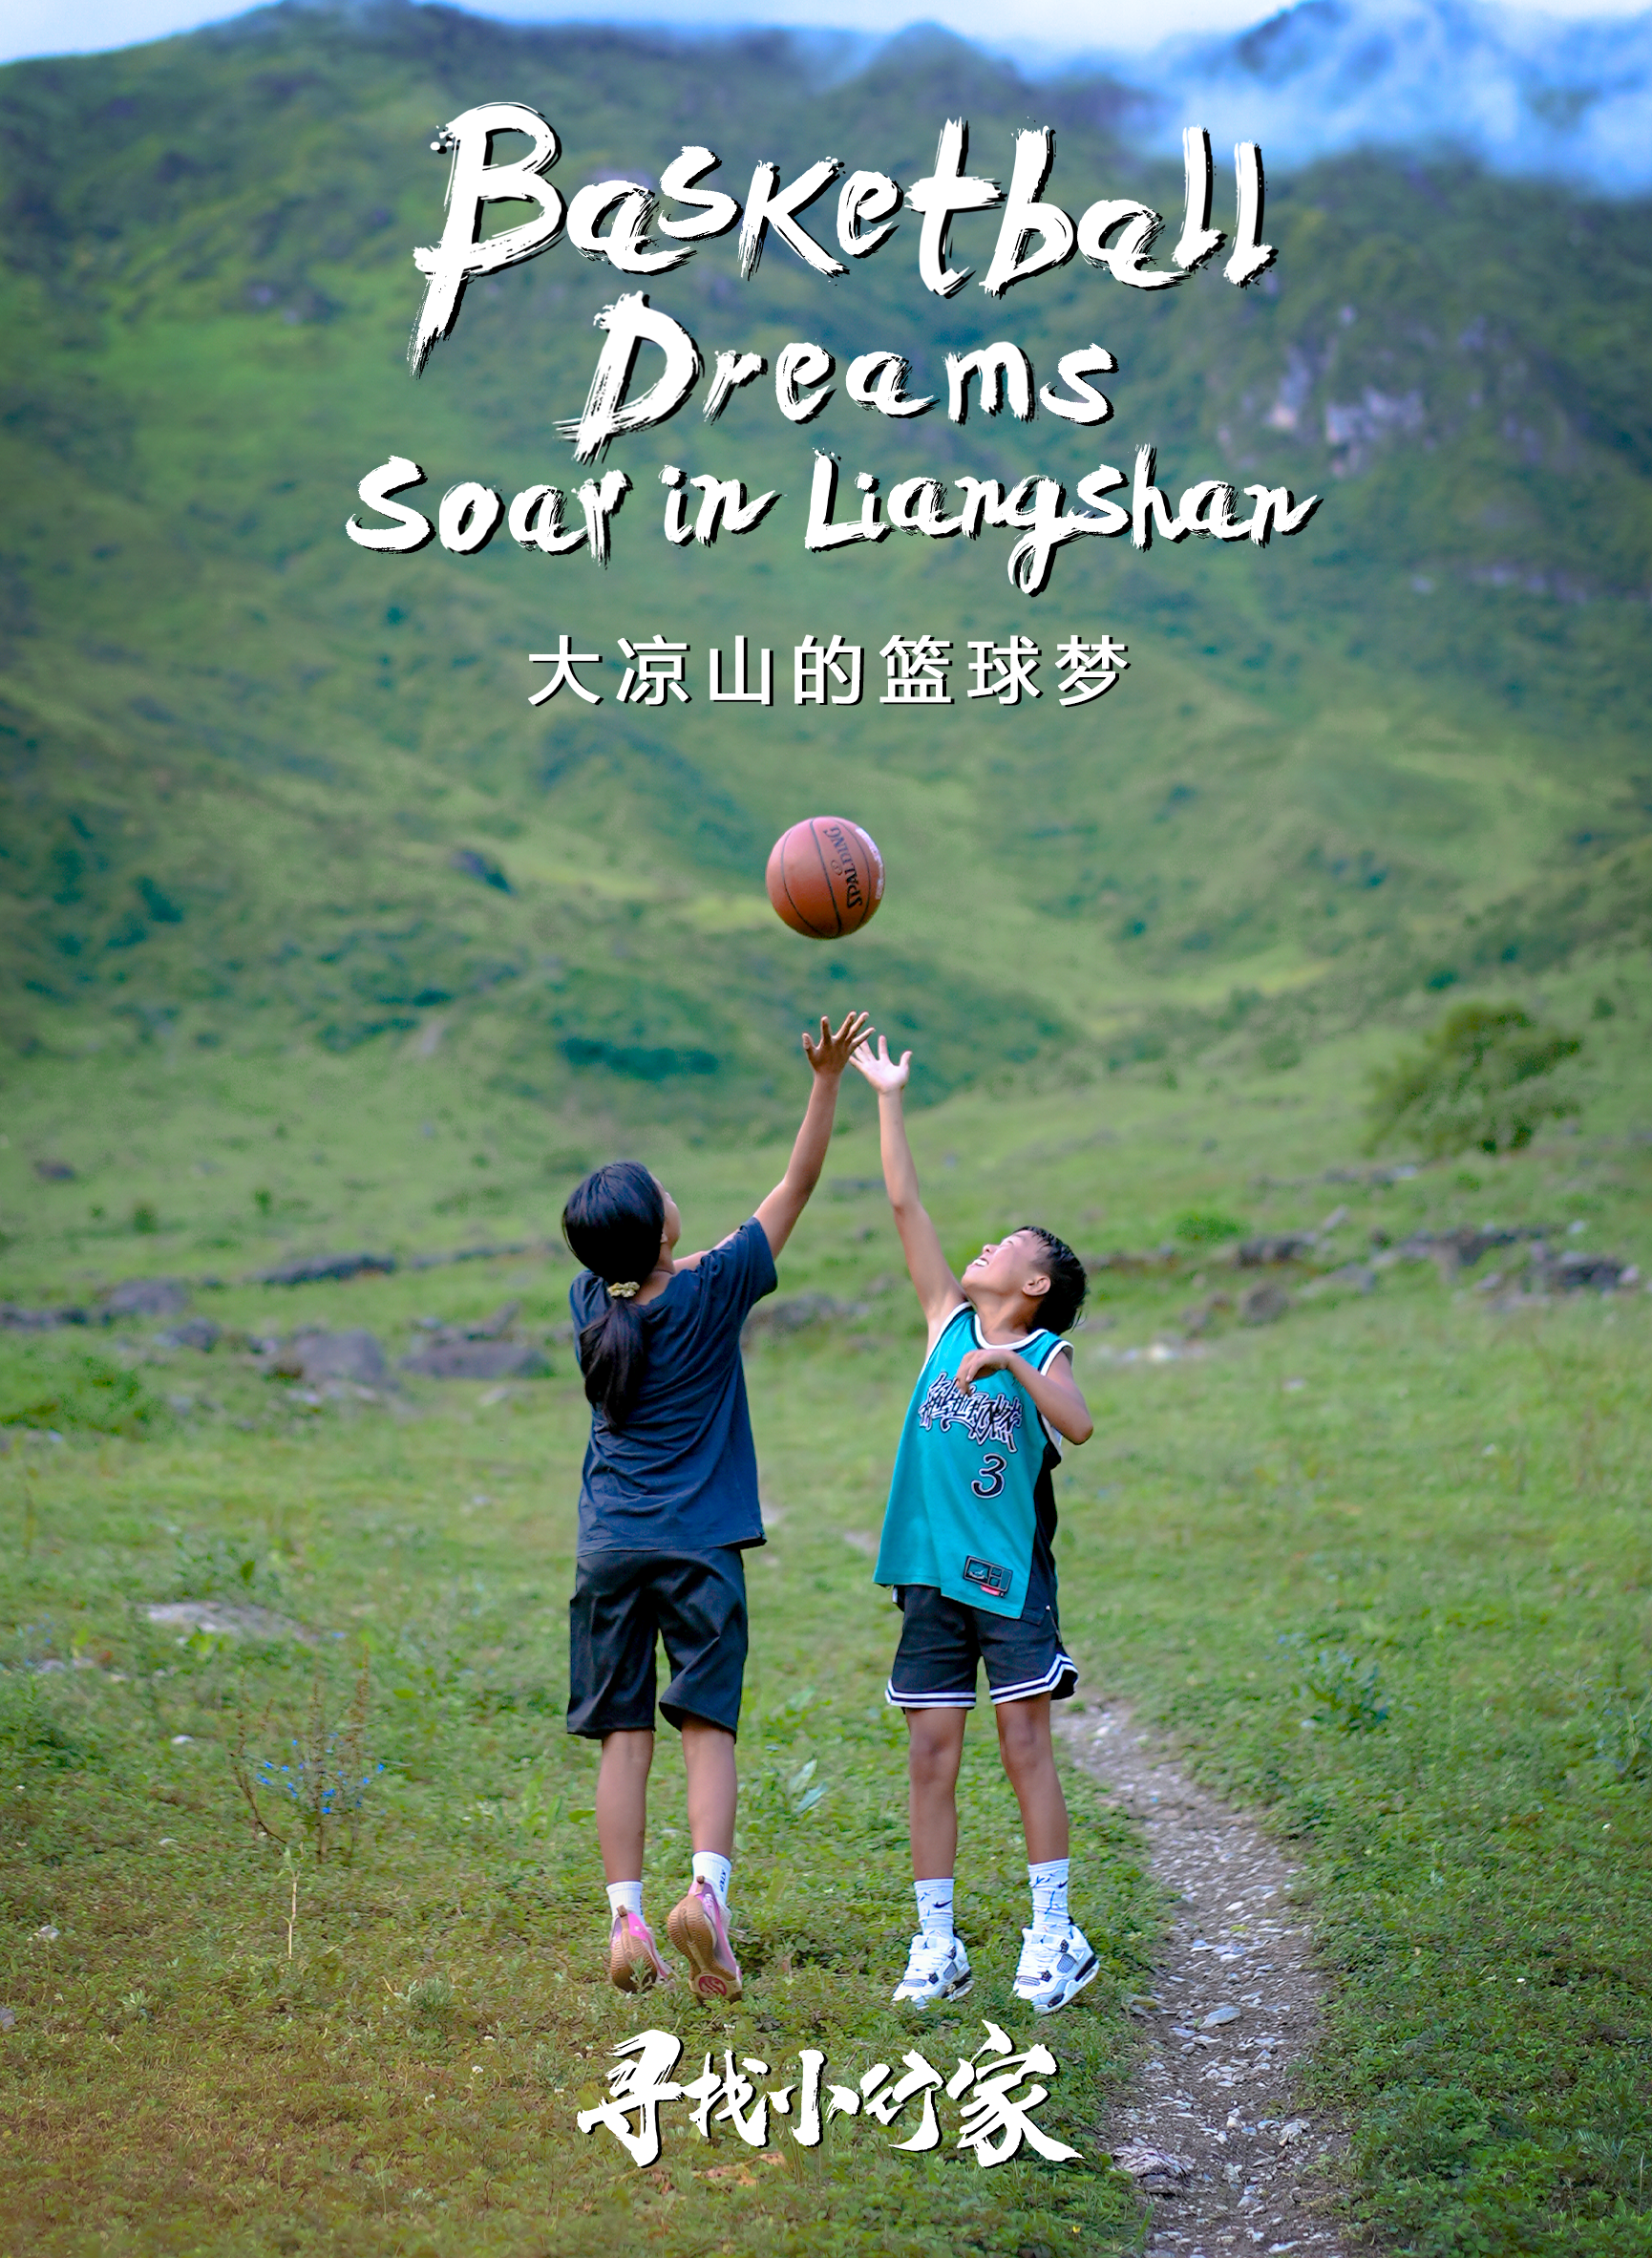 How basketball changes lives of a group of Liangshan children